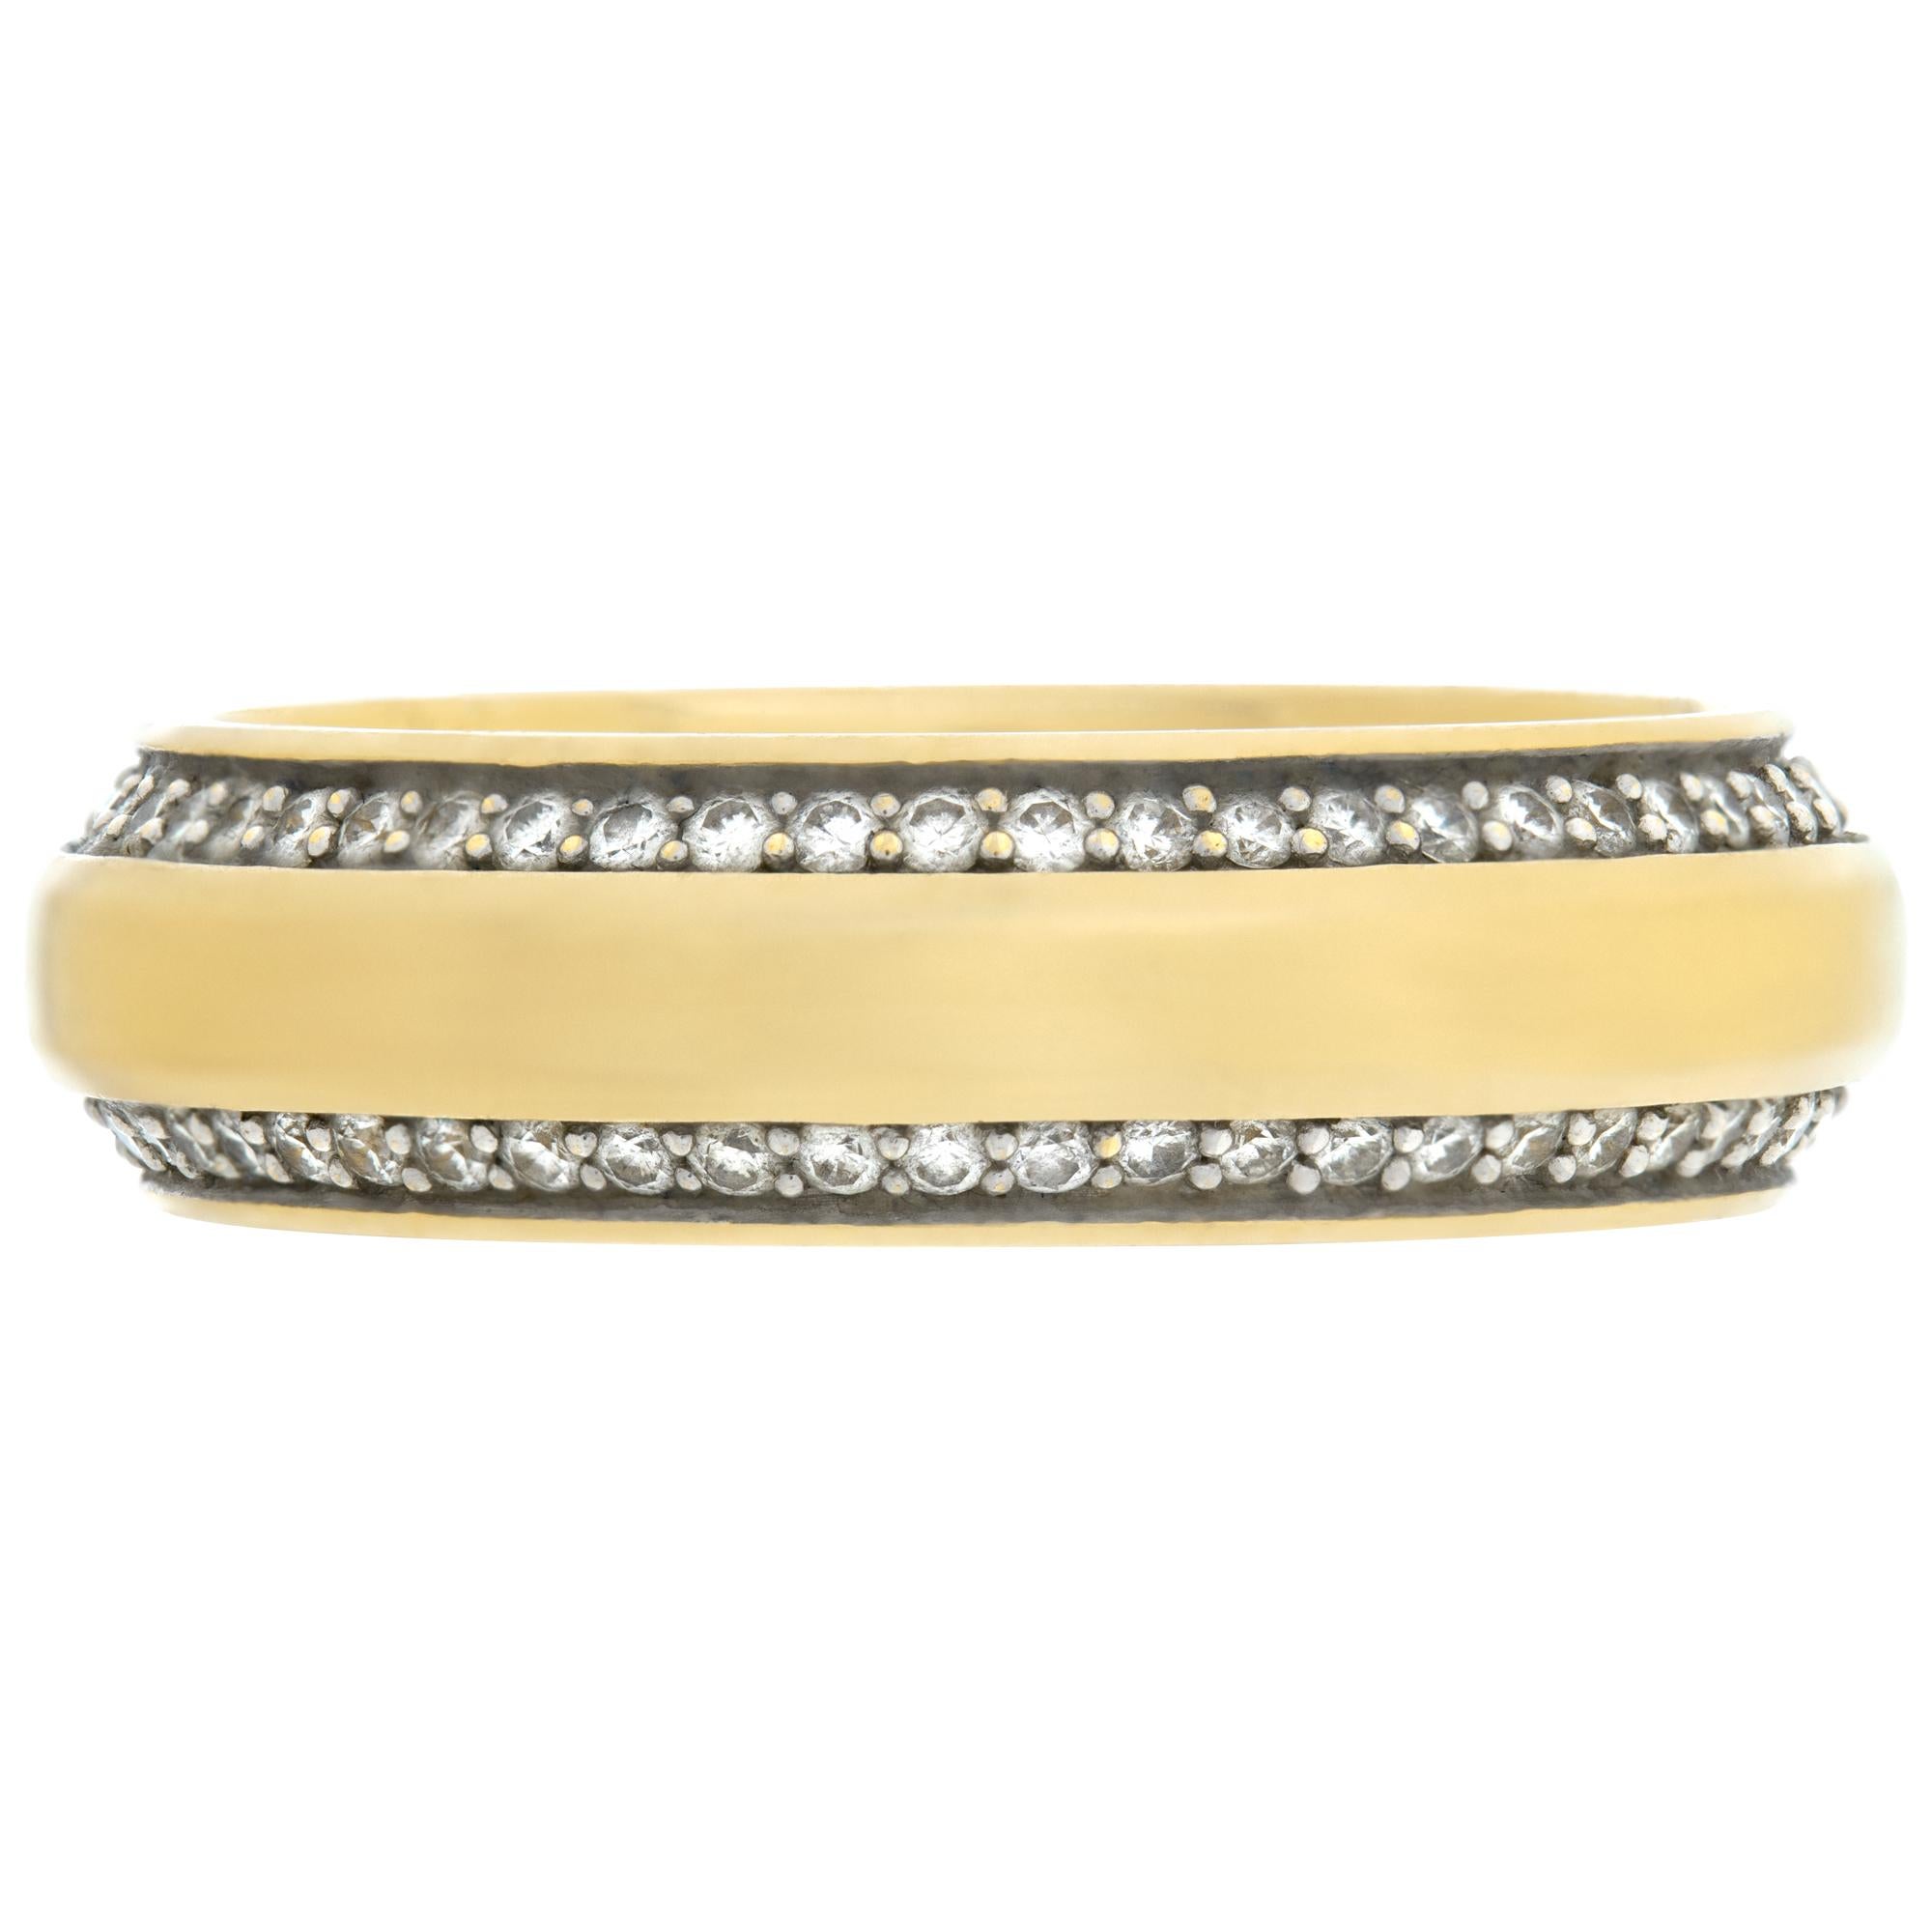 David Yurman beveled band ring in 18k yellow gold with 0.67 carats in diamonds. 6mm width. Ring size 10. Comes with original box.This David Yurman ring is currently size 10 and some items can be sized up or down, please ask! It weighs 7.5